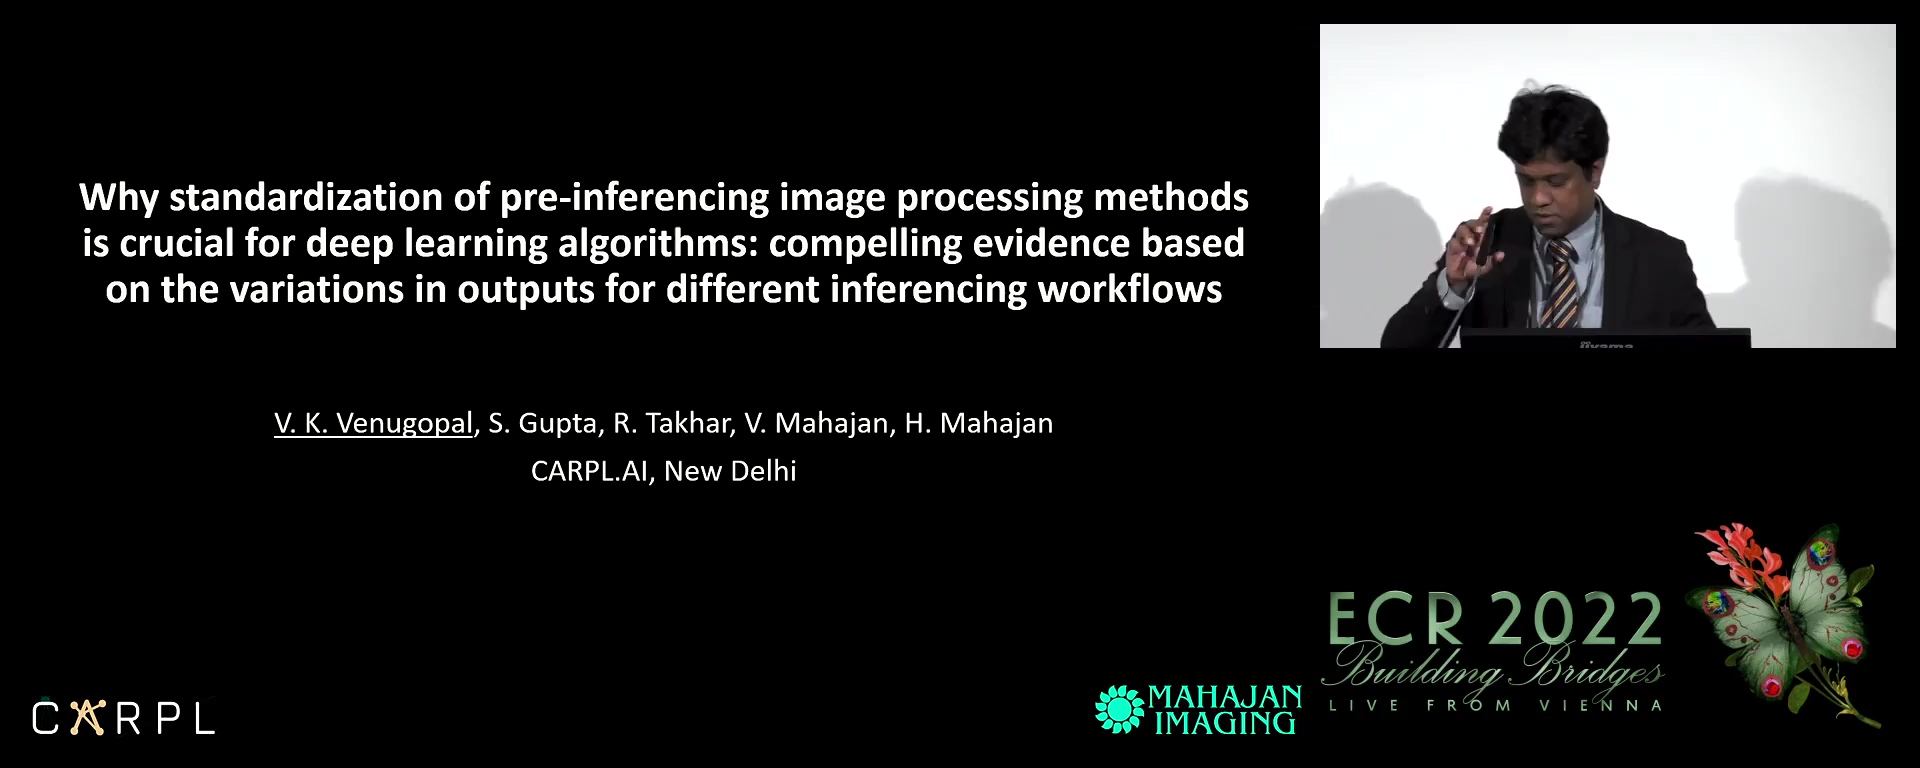 Why standardisation of preinferencing image processing methods is crucial for deep learning algorithms: compelling evidence based on the variations in outputs for different inferencing workflows - Vasantha Kumar Venugopal, New Delhi / IN